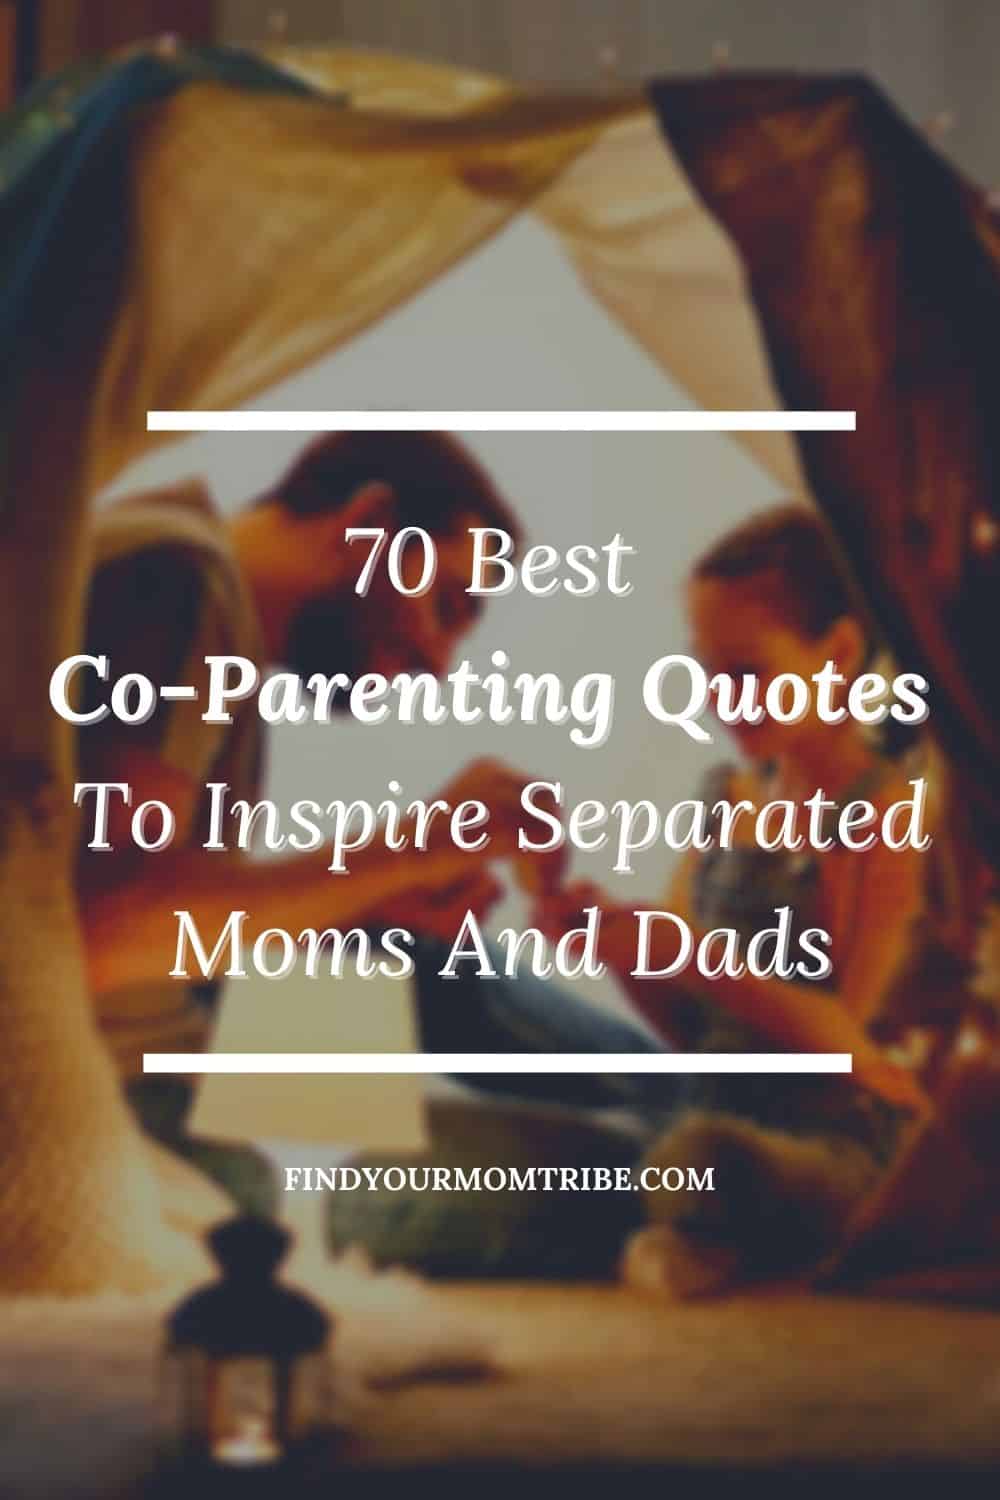 70 Best Co-Parenting Quotes To Inspire Separated Moms And Dads